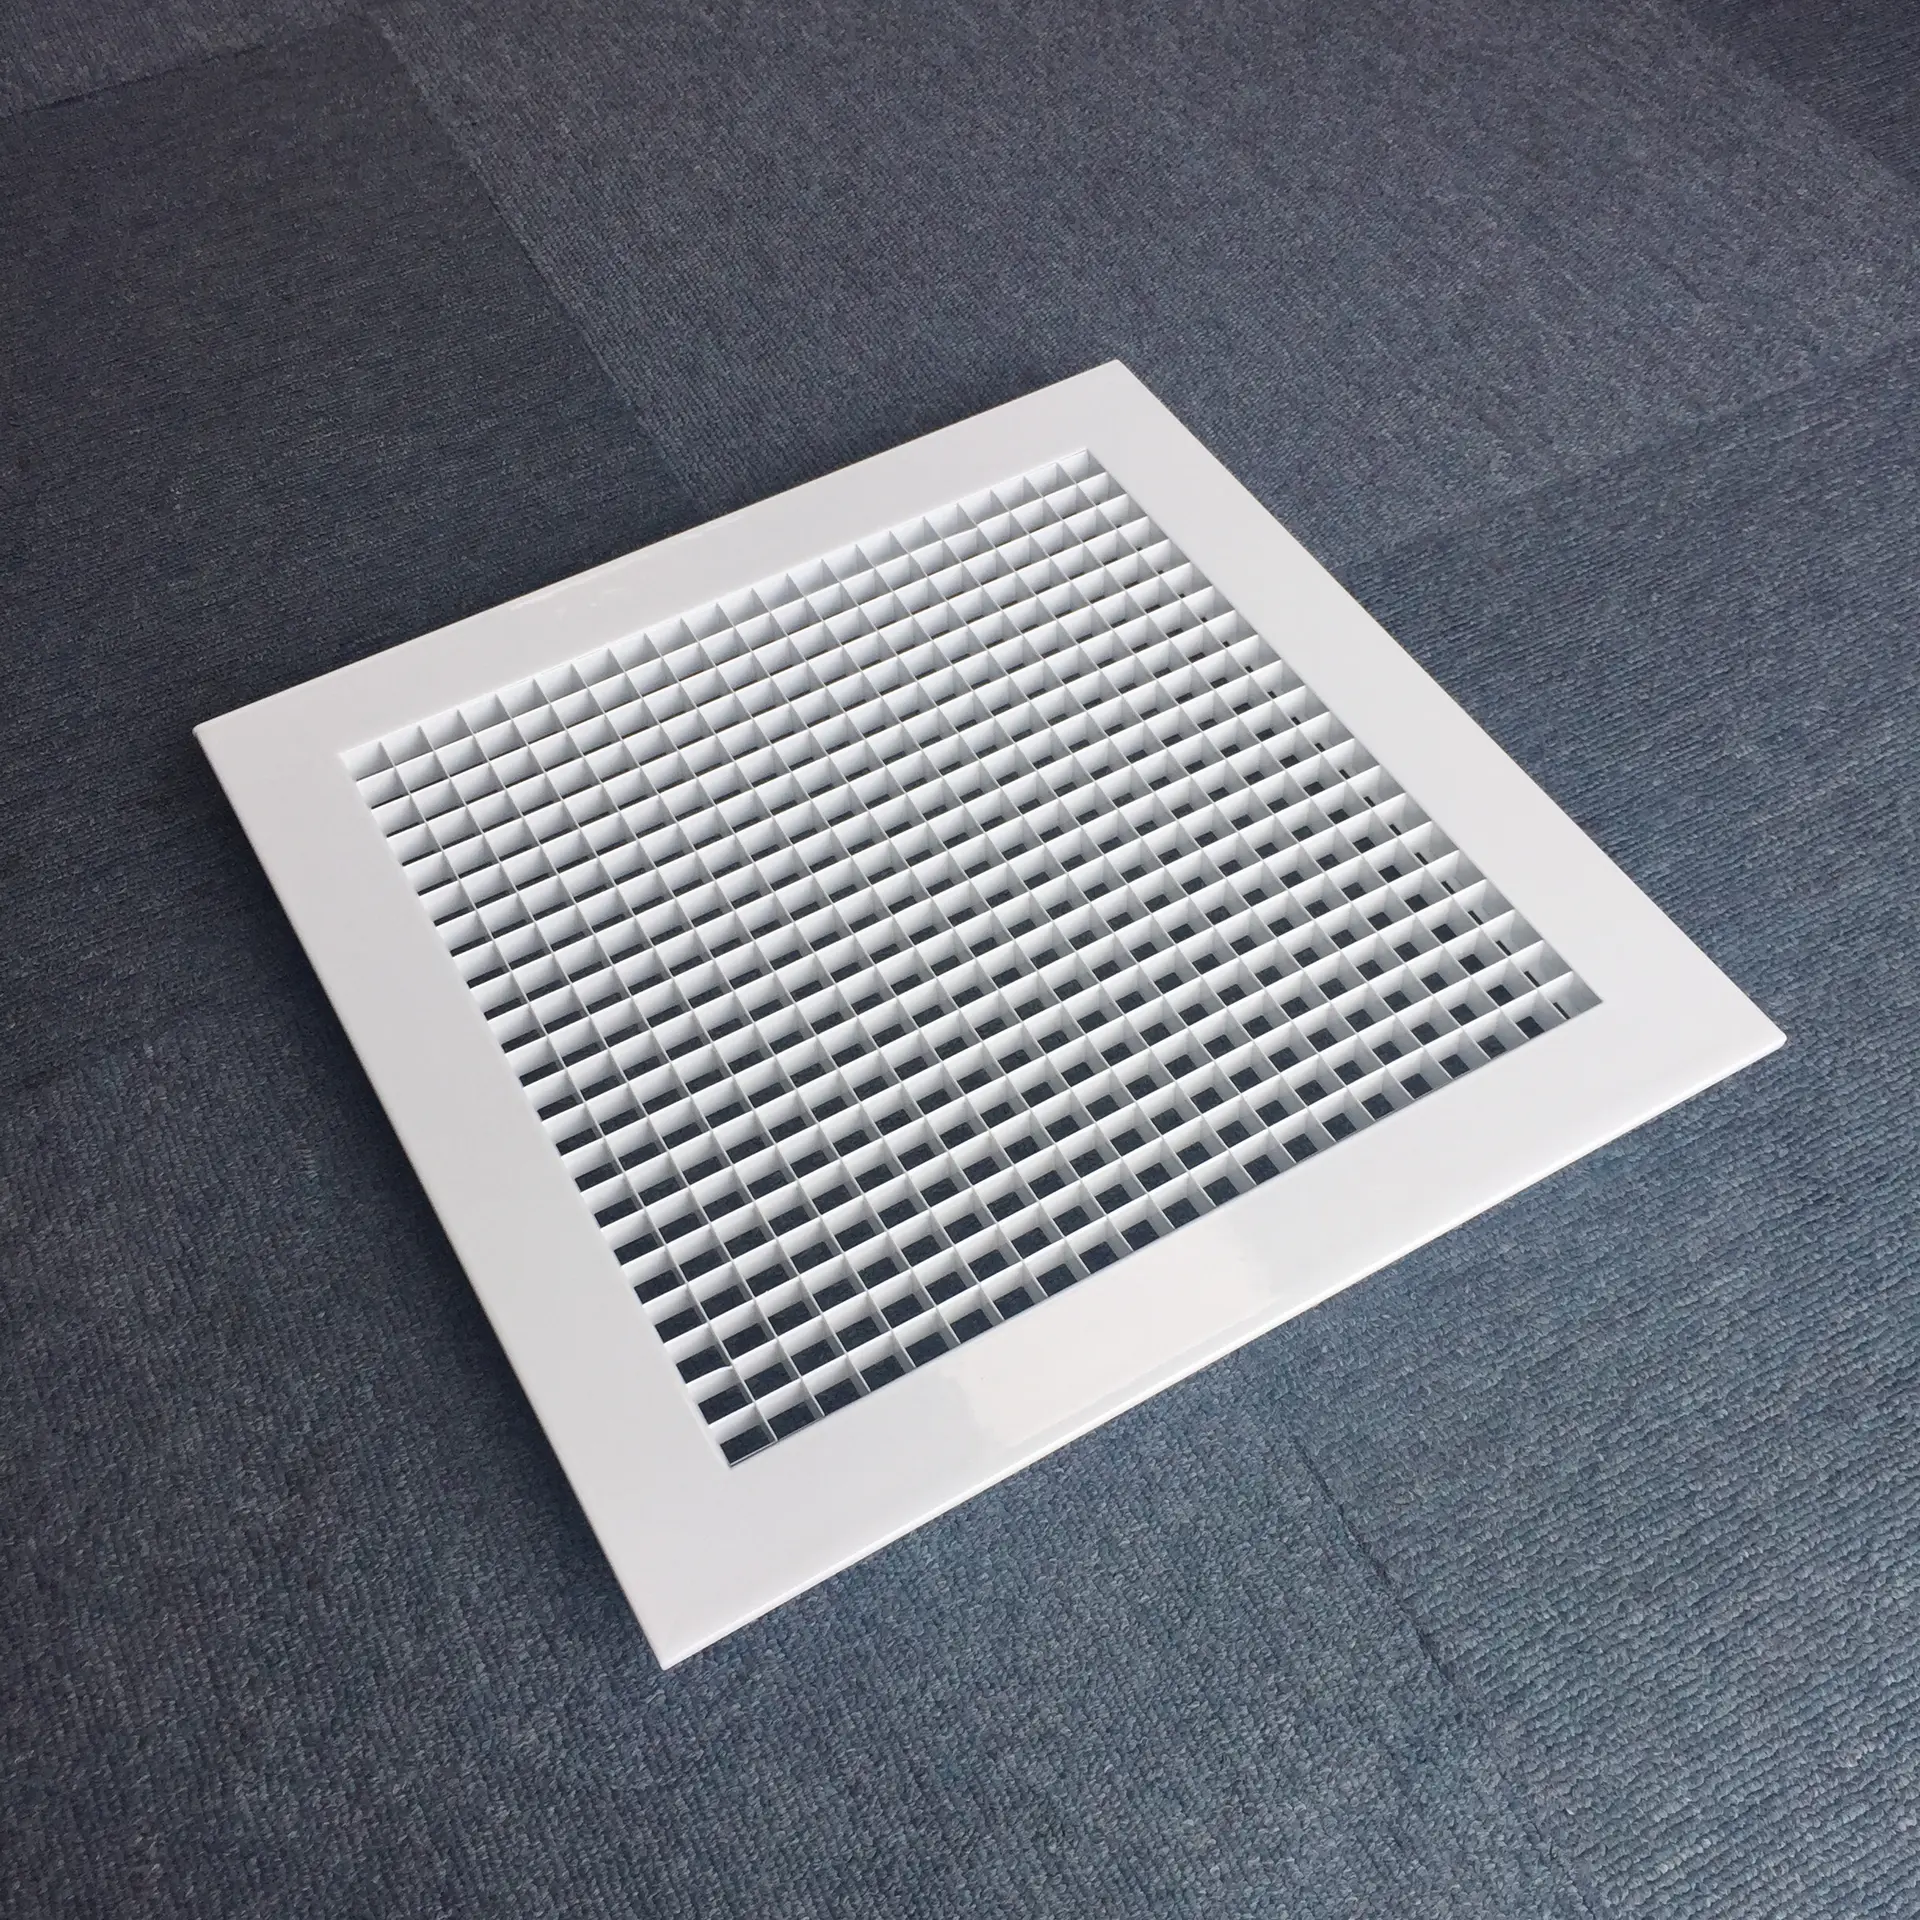 HVAC System Return Air Aluminum Alloy Perforated Egg Crate Air Grille for Ventilation